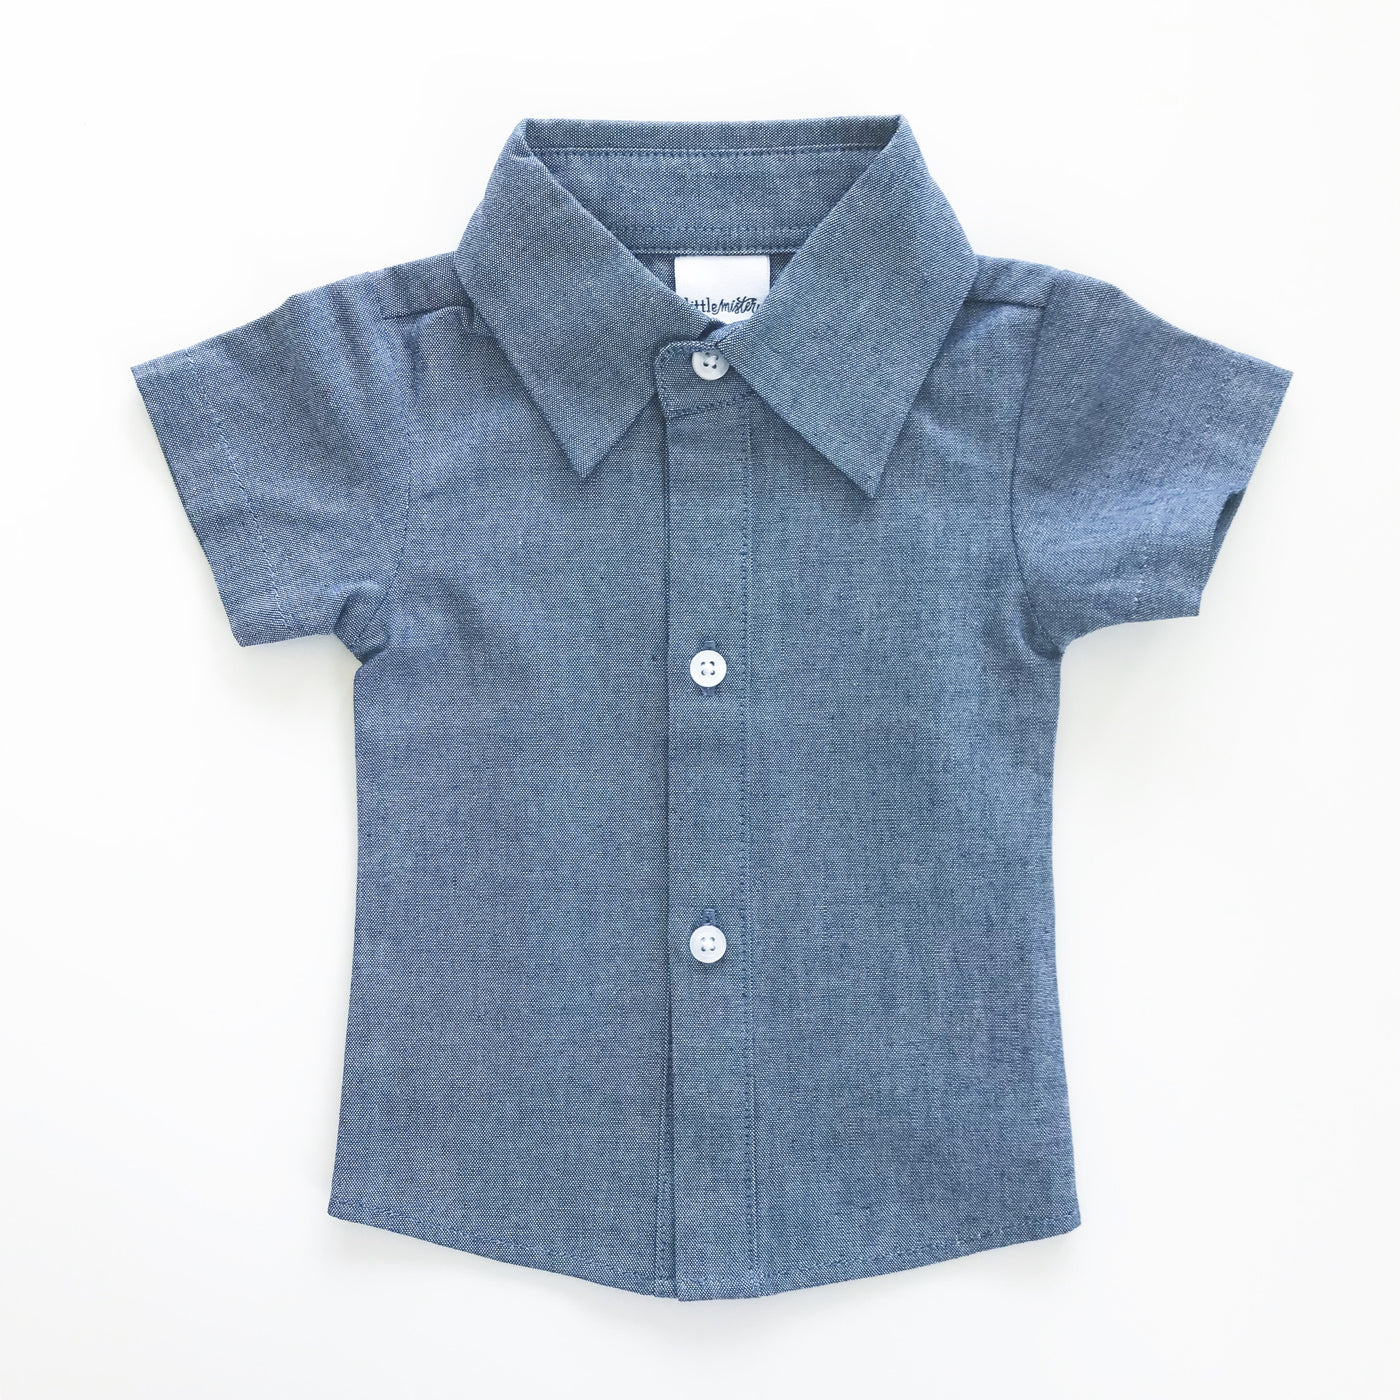 BABY & TODDLER BUTTON UP SHIRT CHAMBRAY – Little Mister